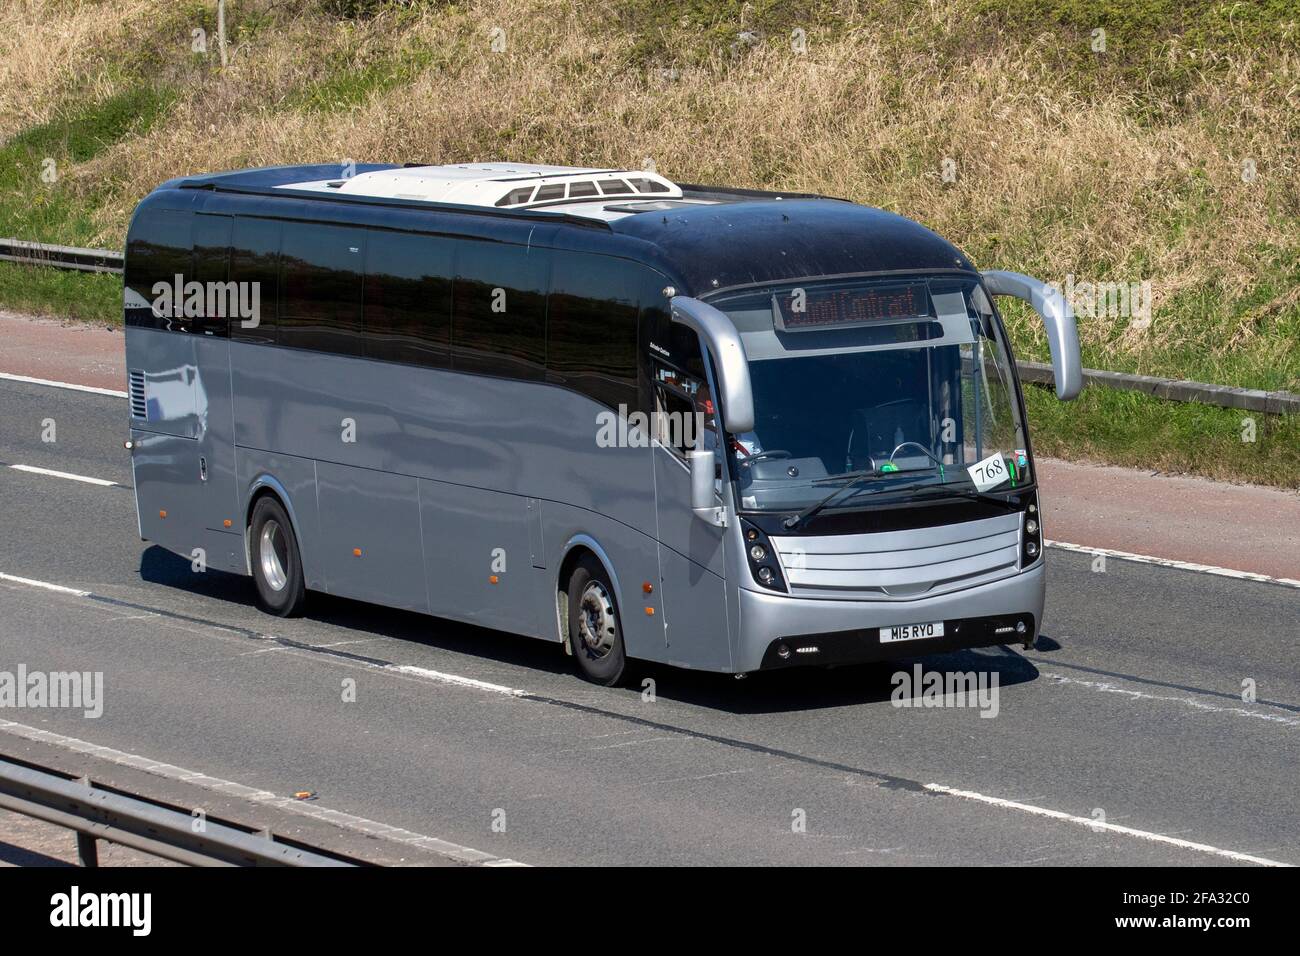 2013 Caetano Levant single deck PSV school contract; Coach tour, bus routes, school contracts, private hire, day excursions and passengers holiday travel on the M6 near Manchester Stock Photo